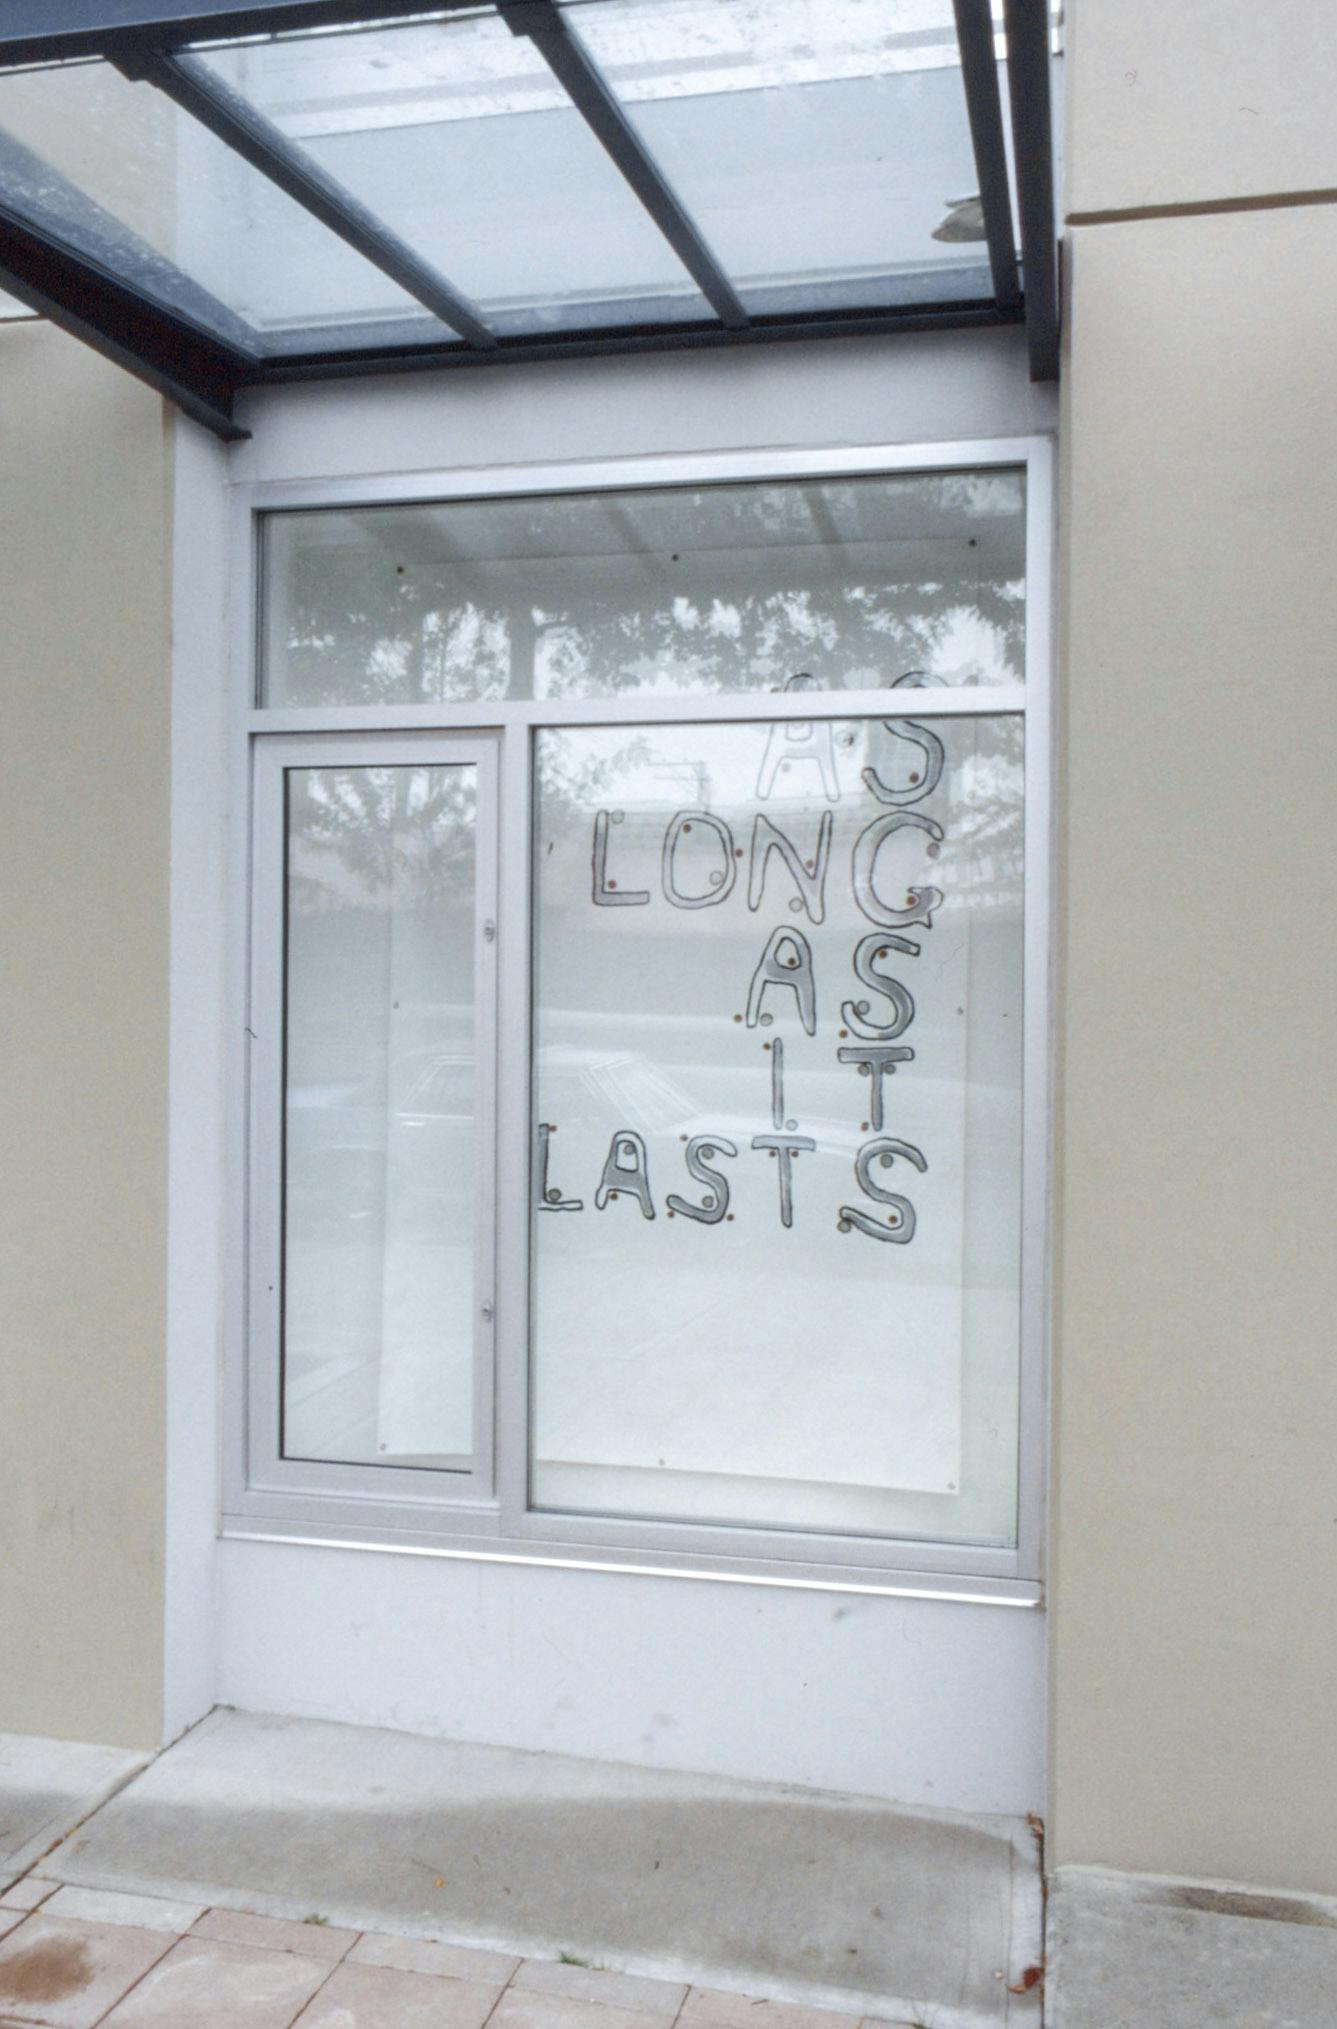 Jill Henderson’s text-based work is installed in one of CAG’s window spaces. The window in this image showcases a handwritten text that reads “as long as it lasts” all in upper cases. 